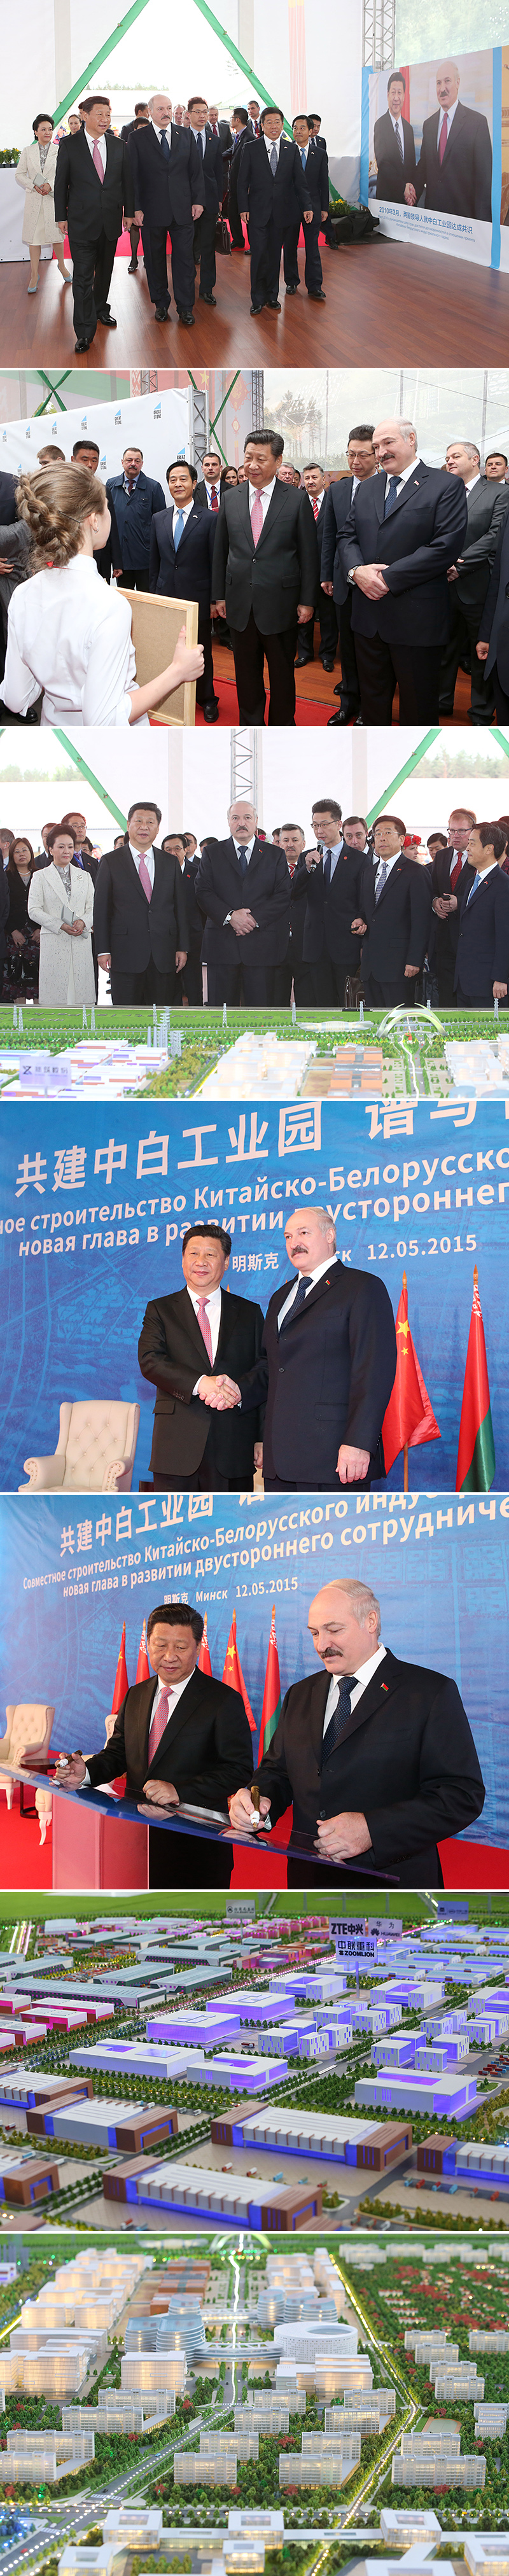 Belarus President Aleksandr Lukashenko and China President Xi Jinping visit the construction site of the China-Belarus industrial park Great Stone (2015)